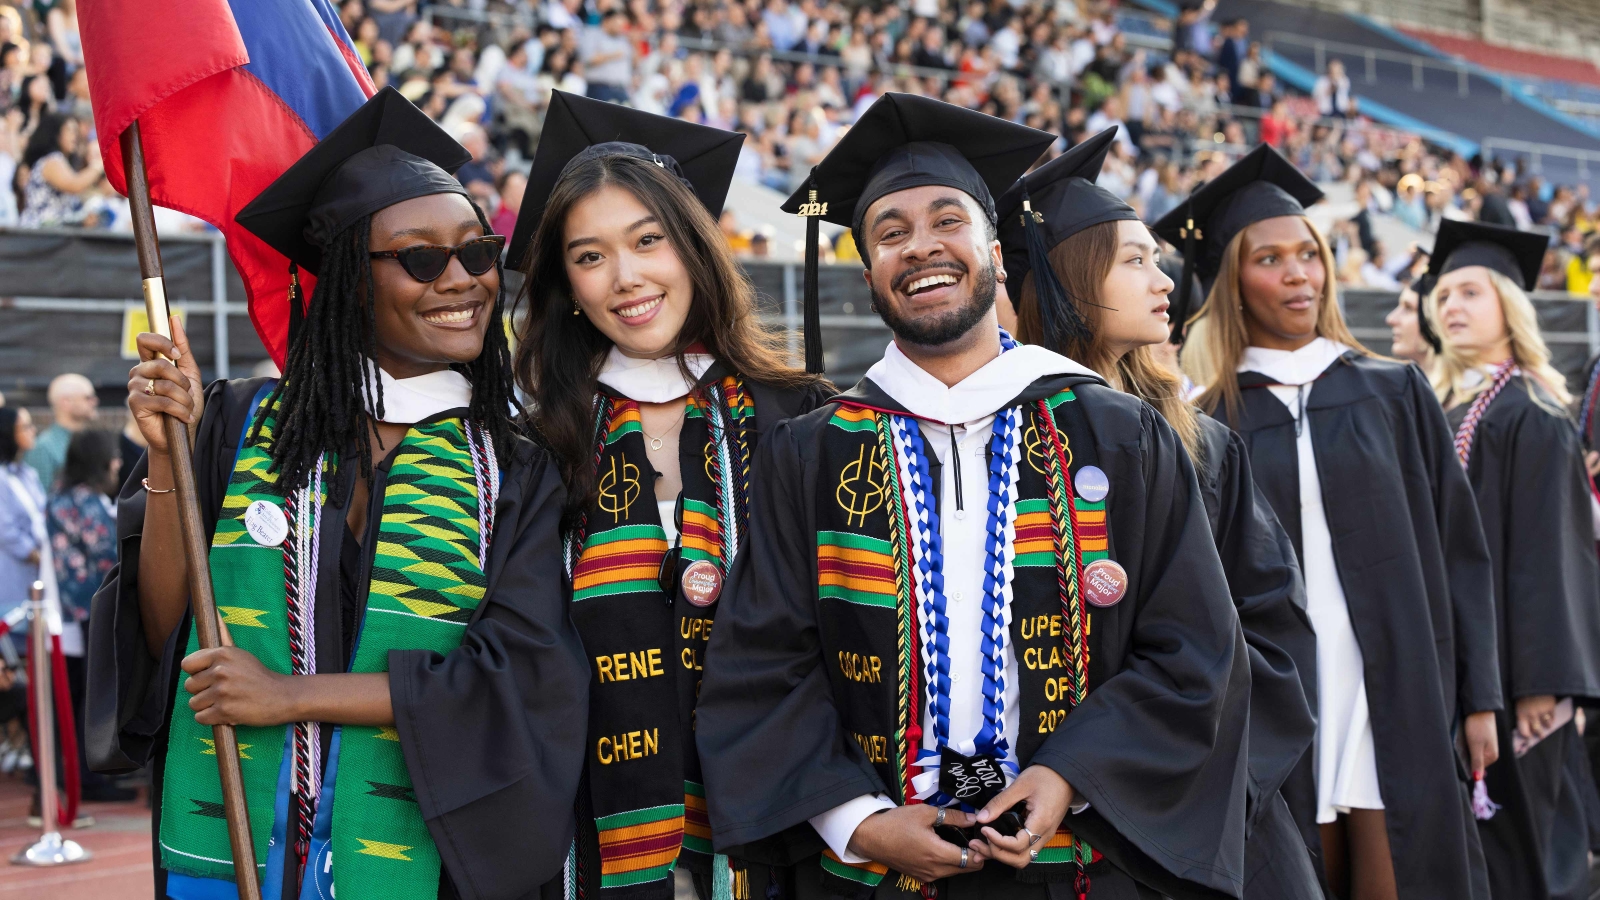 A group of students (Cystal Marshall, Rene Chen, Oscar Vasquez) standing in a crowded stadium. They are all wearing caps and gowns, and smiling. Marshall, on the left, holds a flag with the school colors.